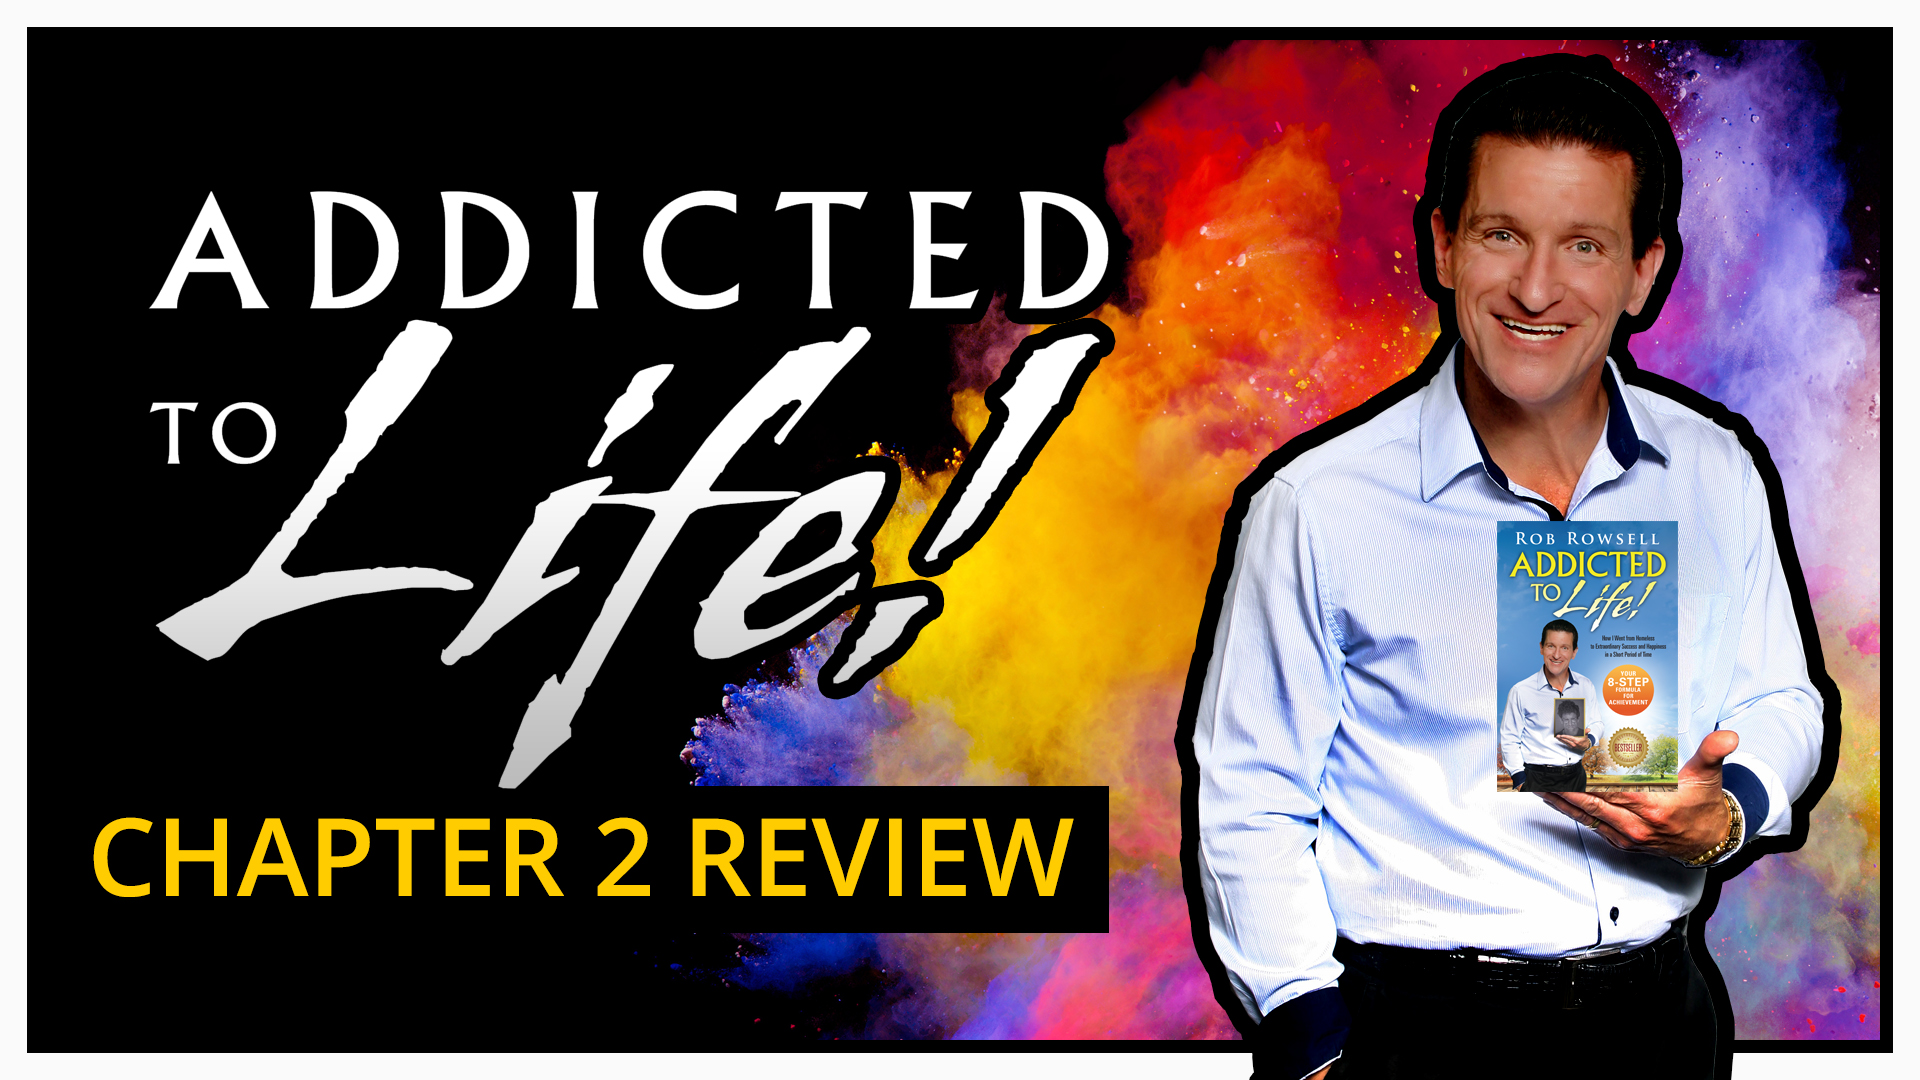 "Addicted to Life" Chapter 2 Review - Get Uncomfortable and Take Action!